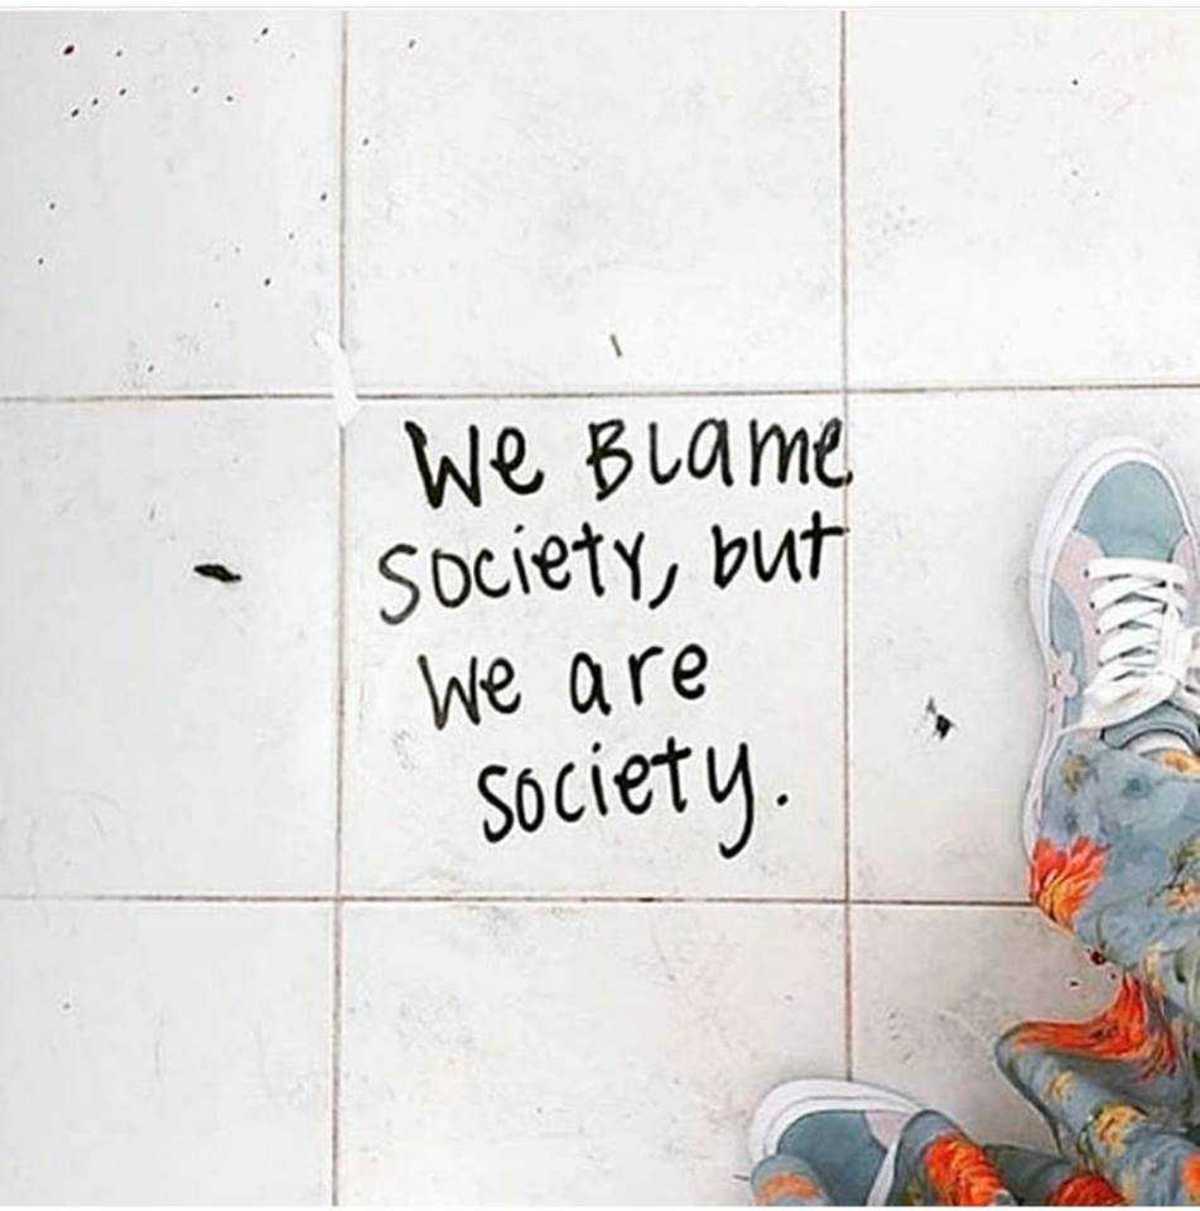 We are society